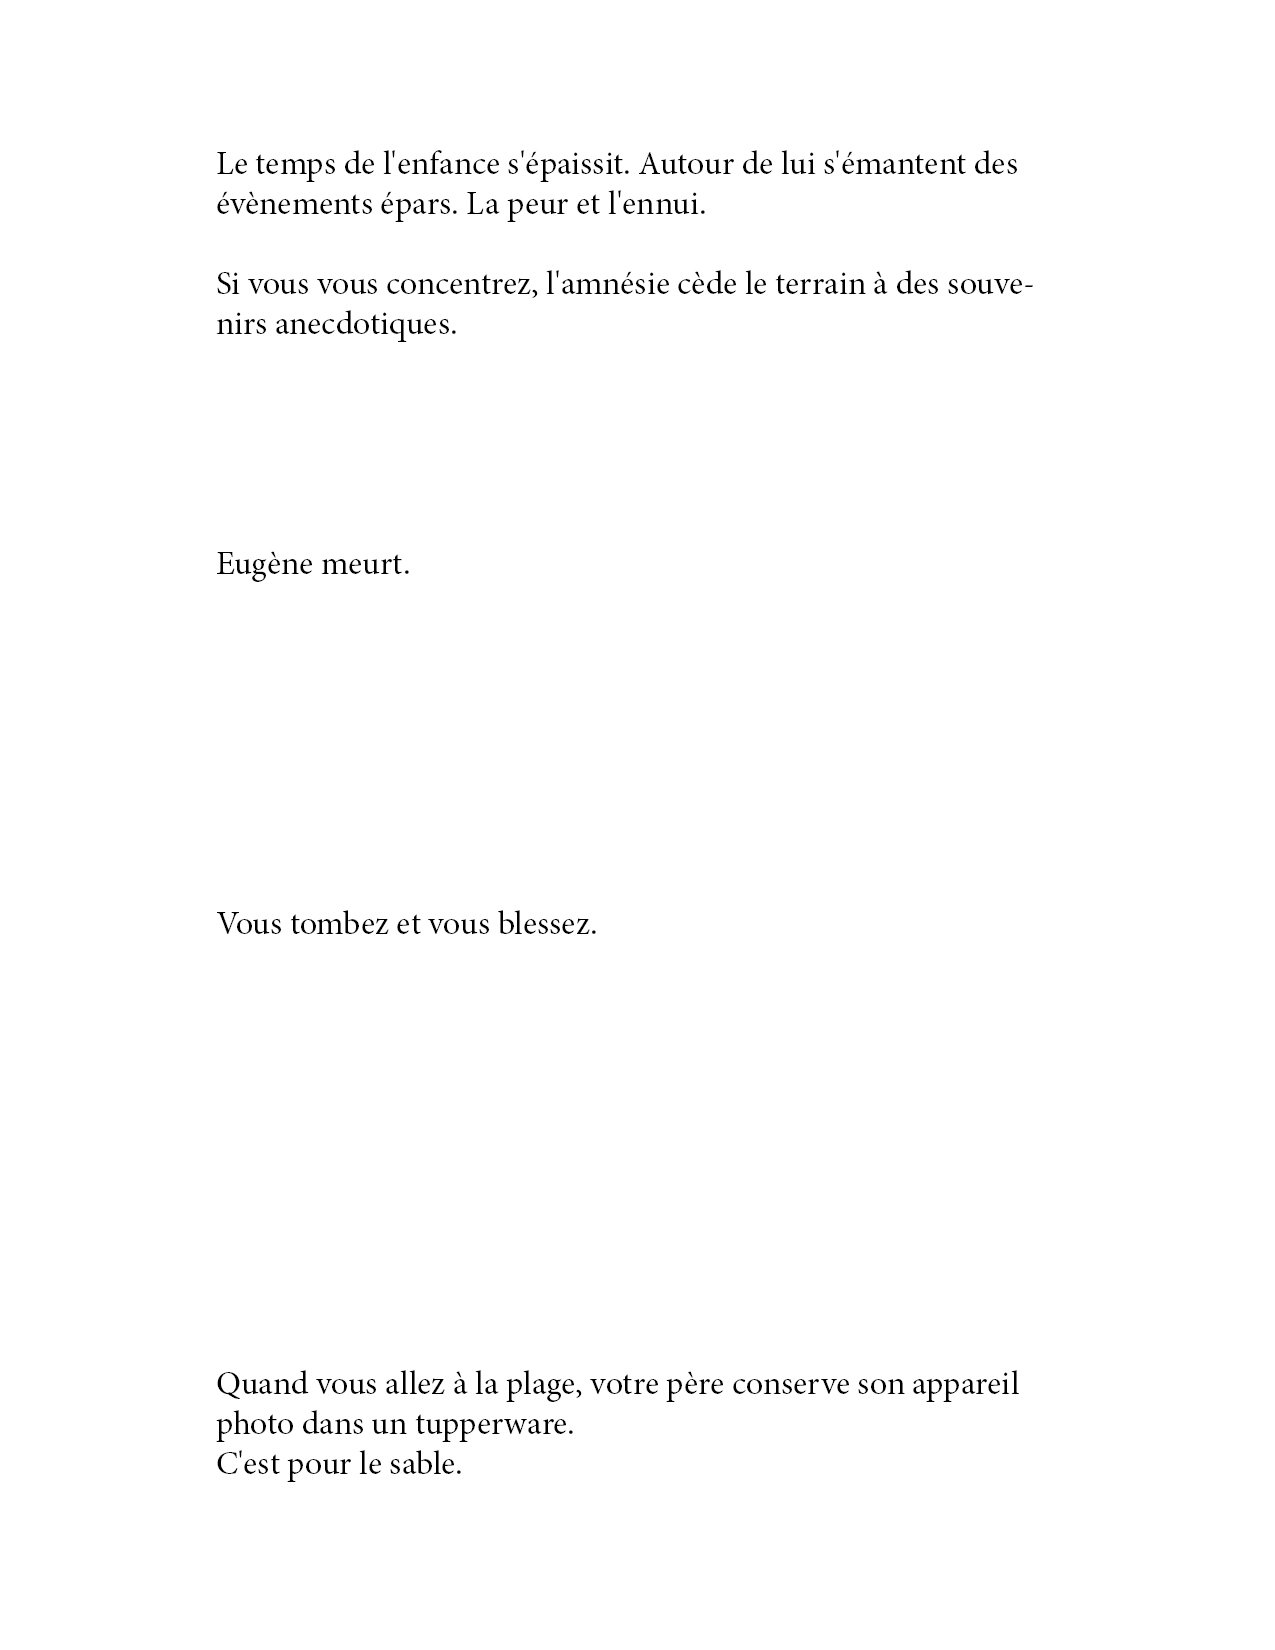 ARCHEOLOGIE_v6_images_texte_64 pages36.jpg